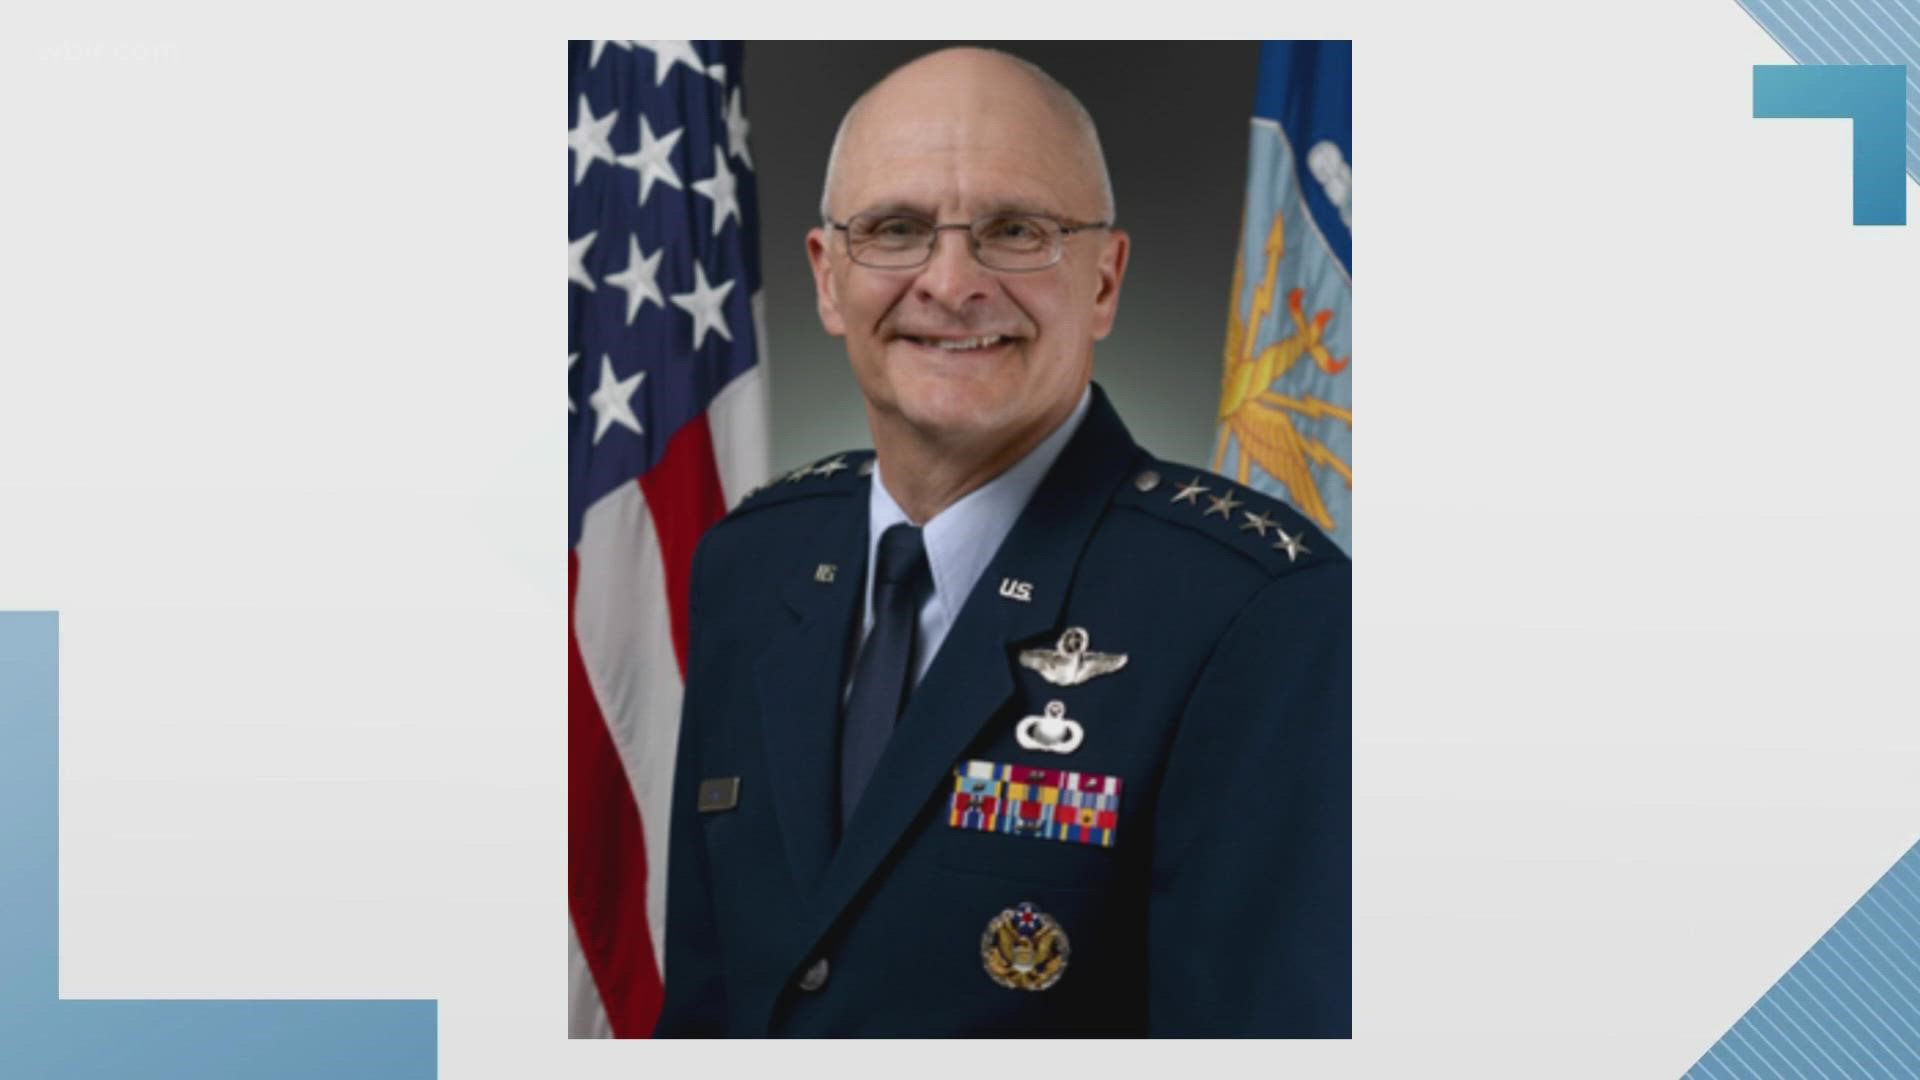 General Arnold W Bunch Jr. served in the U.S. Air Force and has no experience teaching children. However, Hamblen Co. Schools leaders changed policy so he could lead